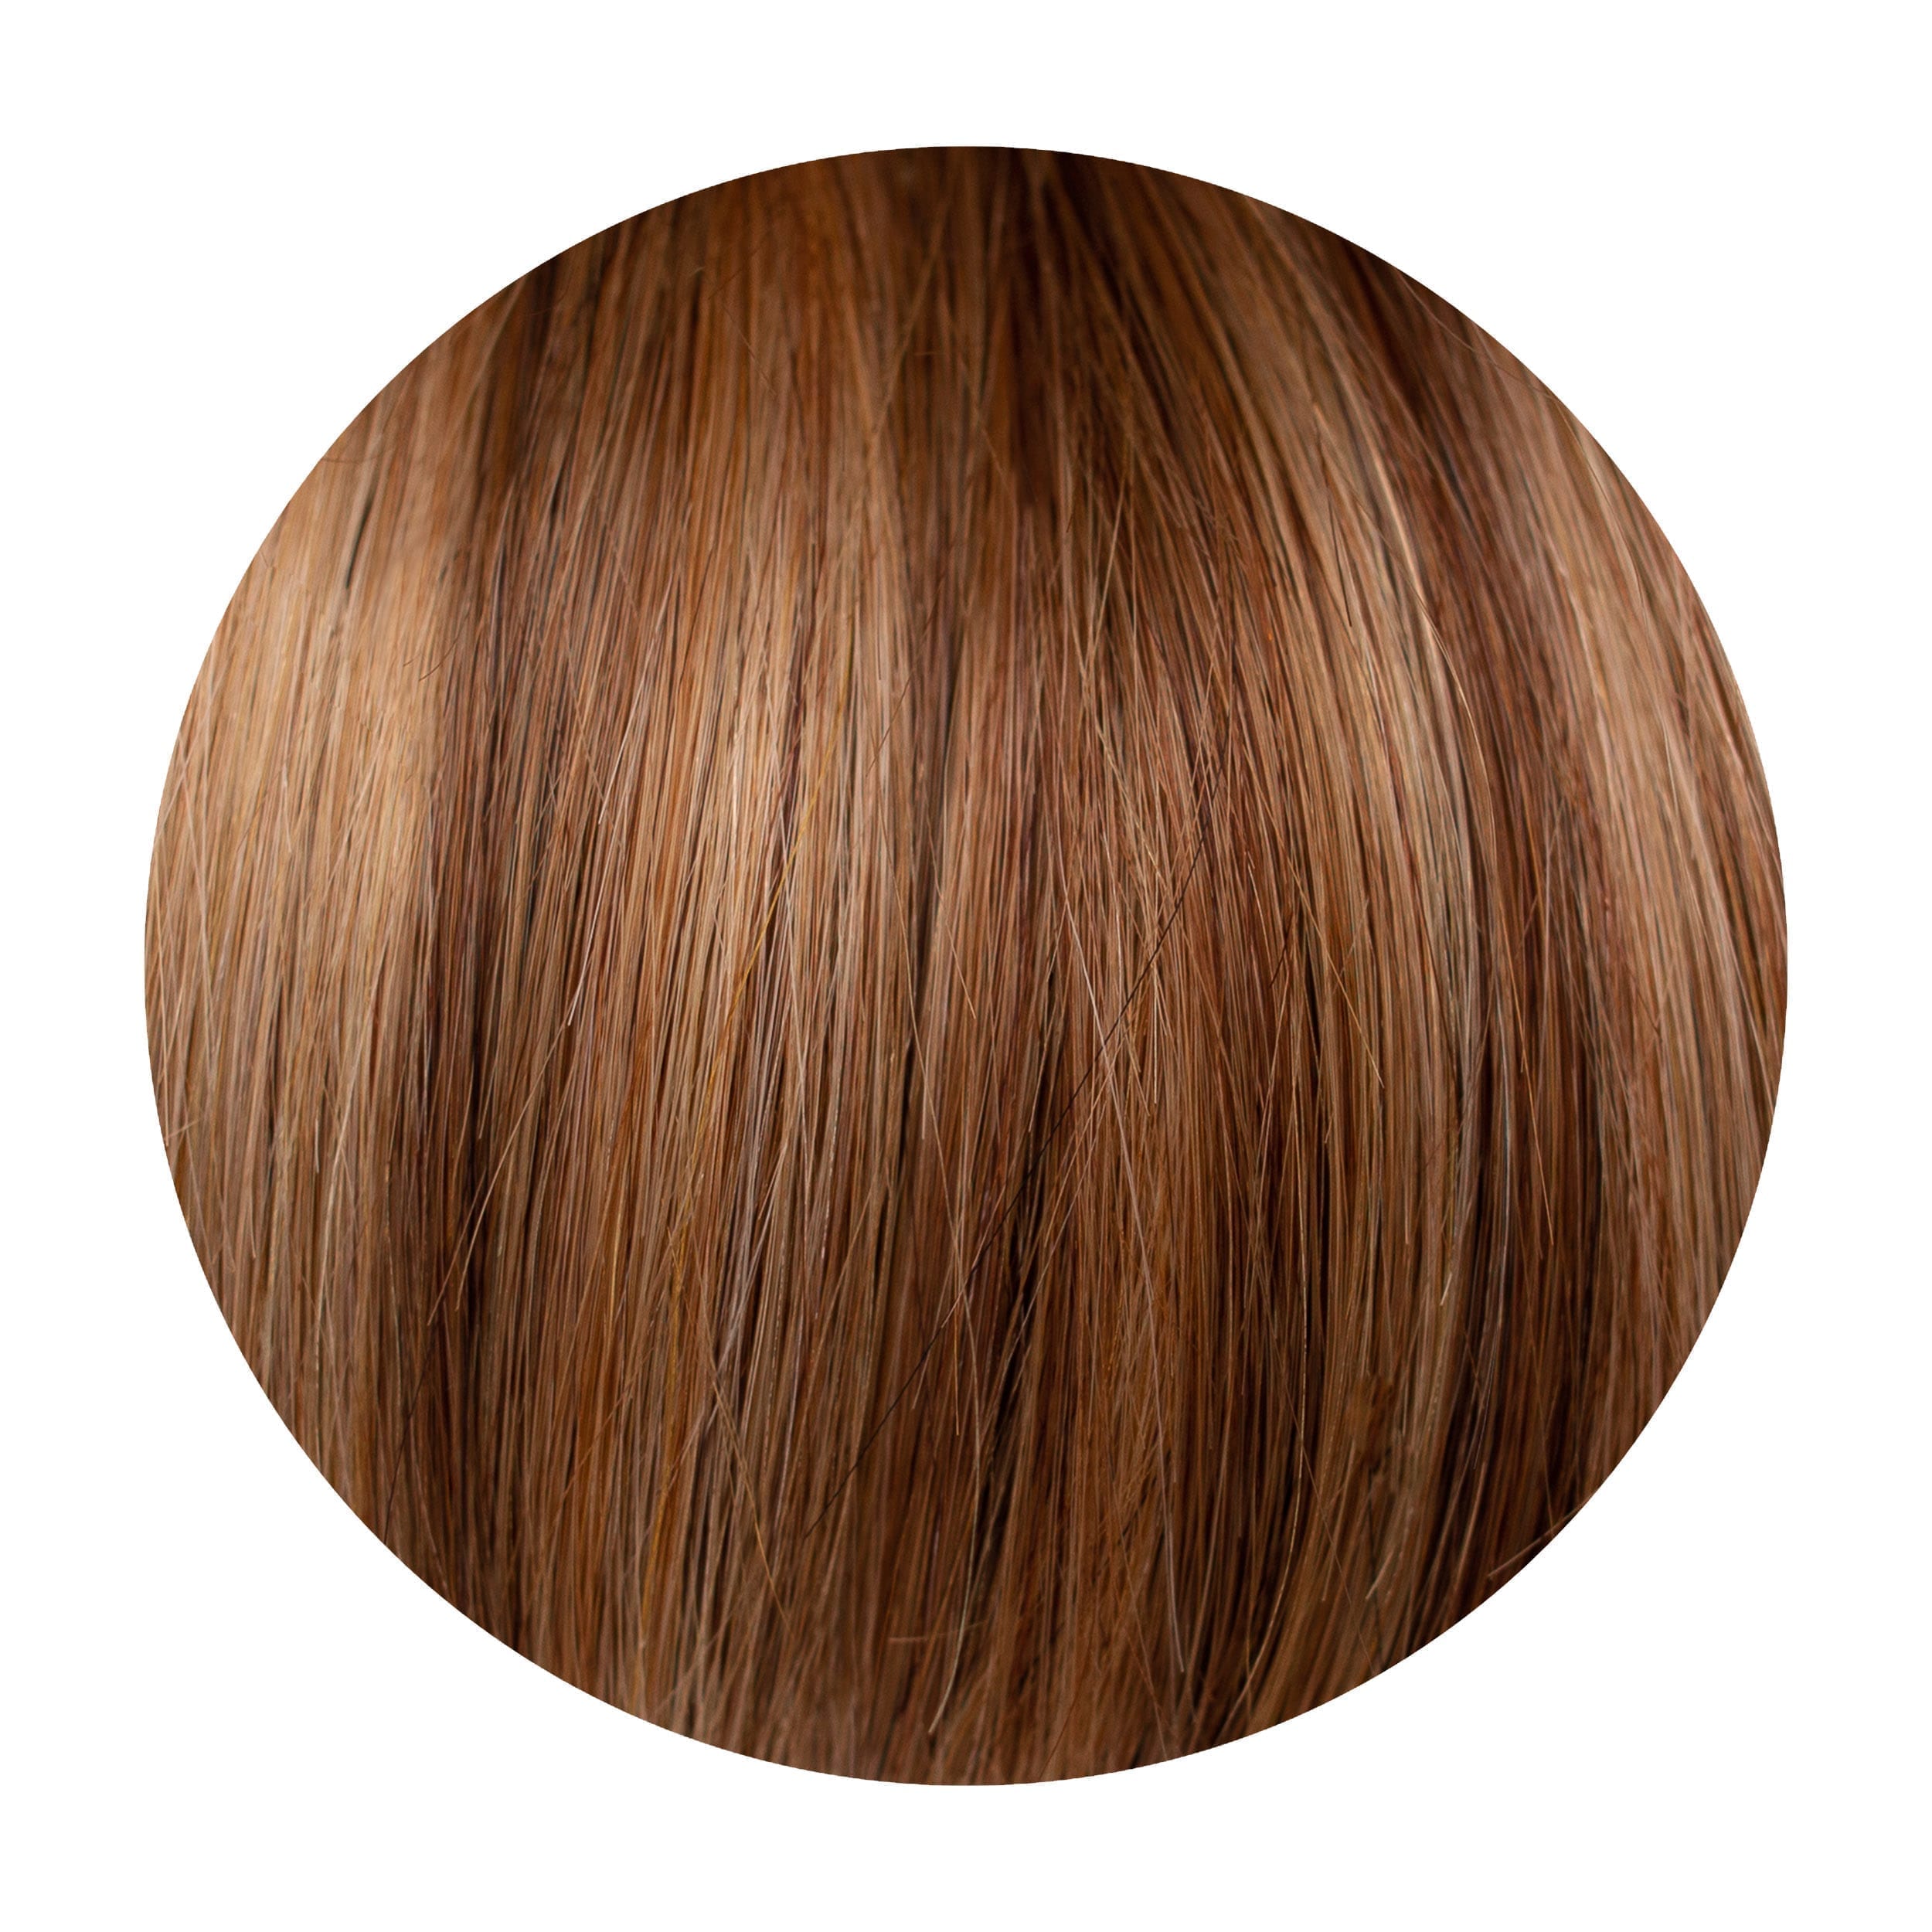 Caramel Blend Piano Colour Human Hair Extensions Clip in 1 Piece